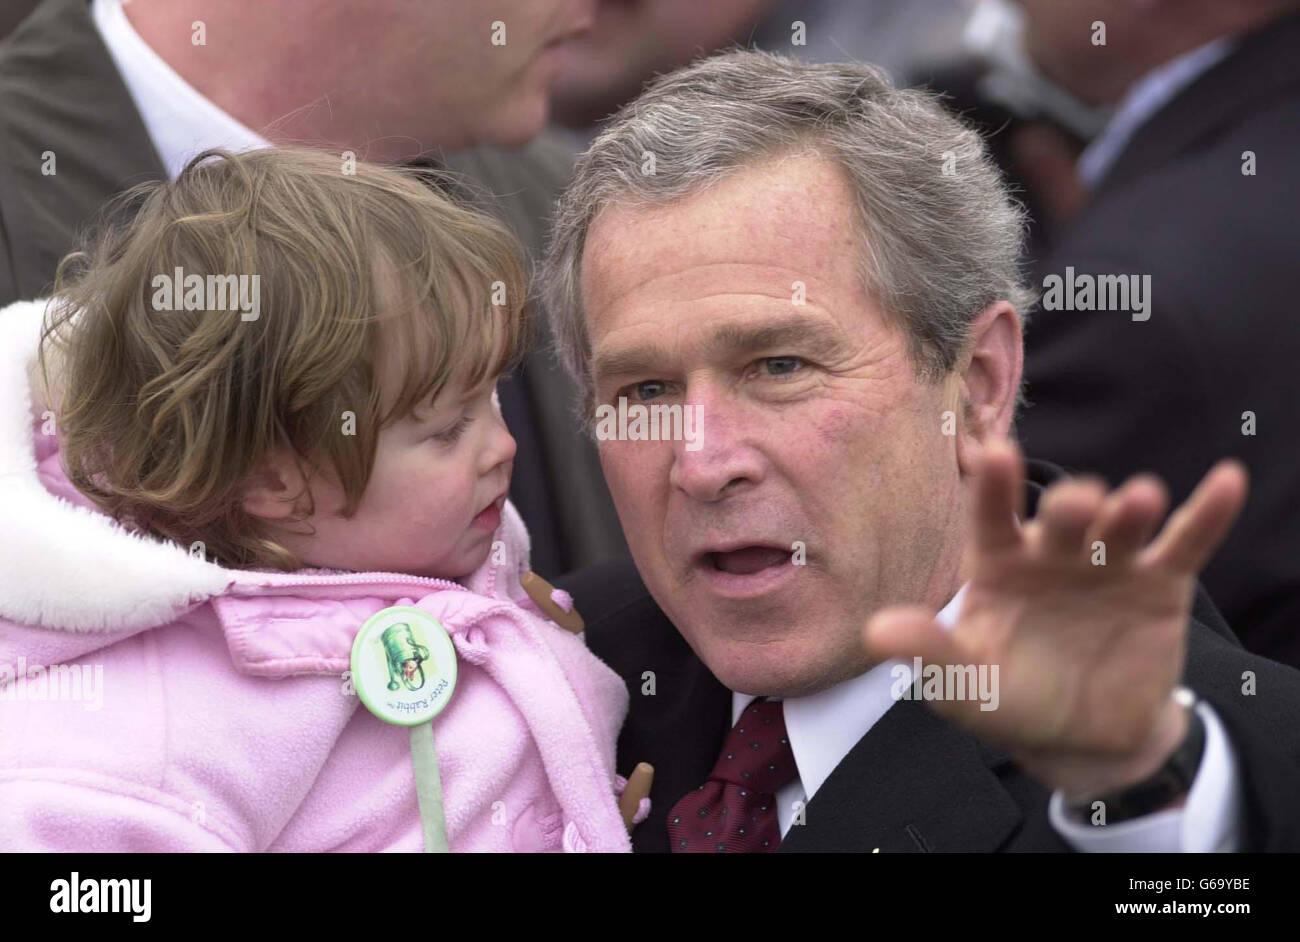 US President George W Bush is greeted by by 19 month old Seria Whickens as he arrives at RAF Aldergrove, in Northern Ireland. * The IRA was under renewed pressure to end its campaign of violence as US President George W Bush arrived in Northern Ireland to urge politicians and paramilitaries to go the extra mile for peace. Stock Photo